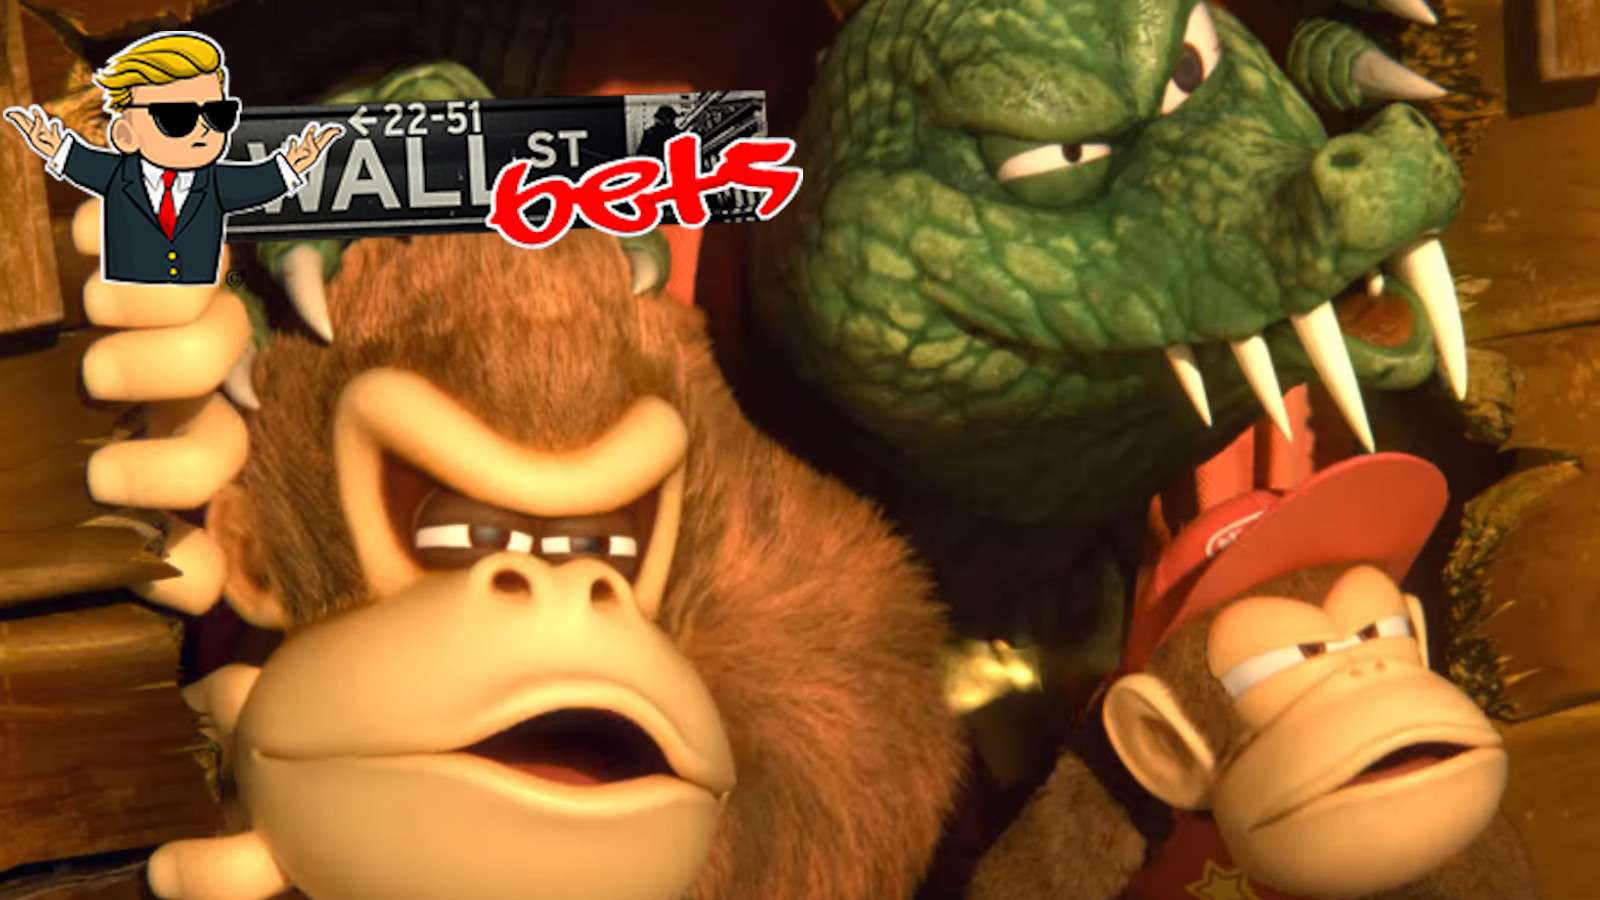 Donkey Kong and Diddy Kong look on suspeciusly